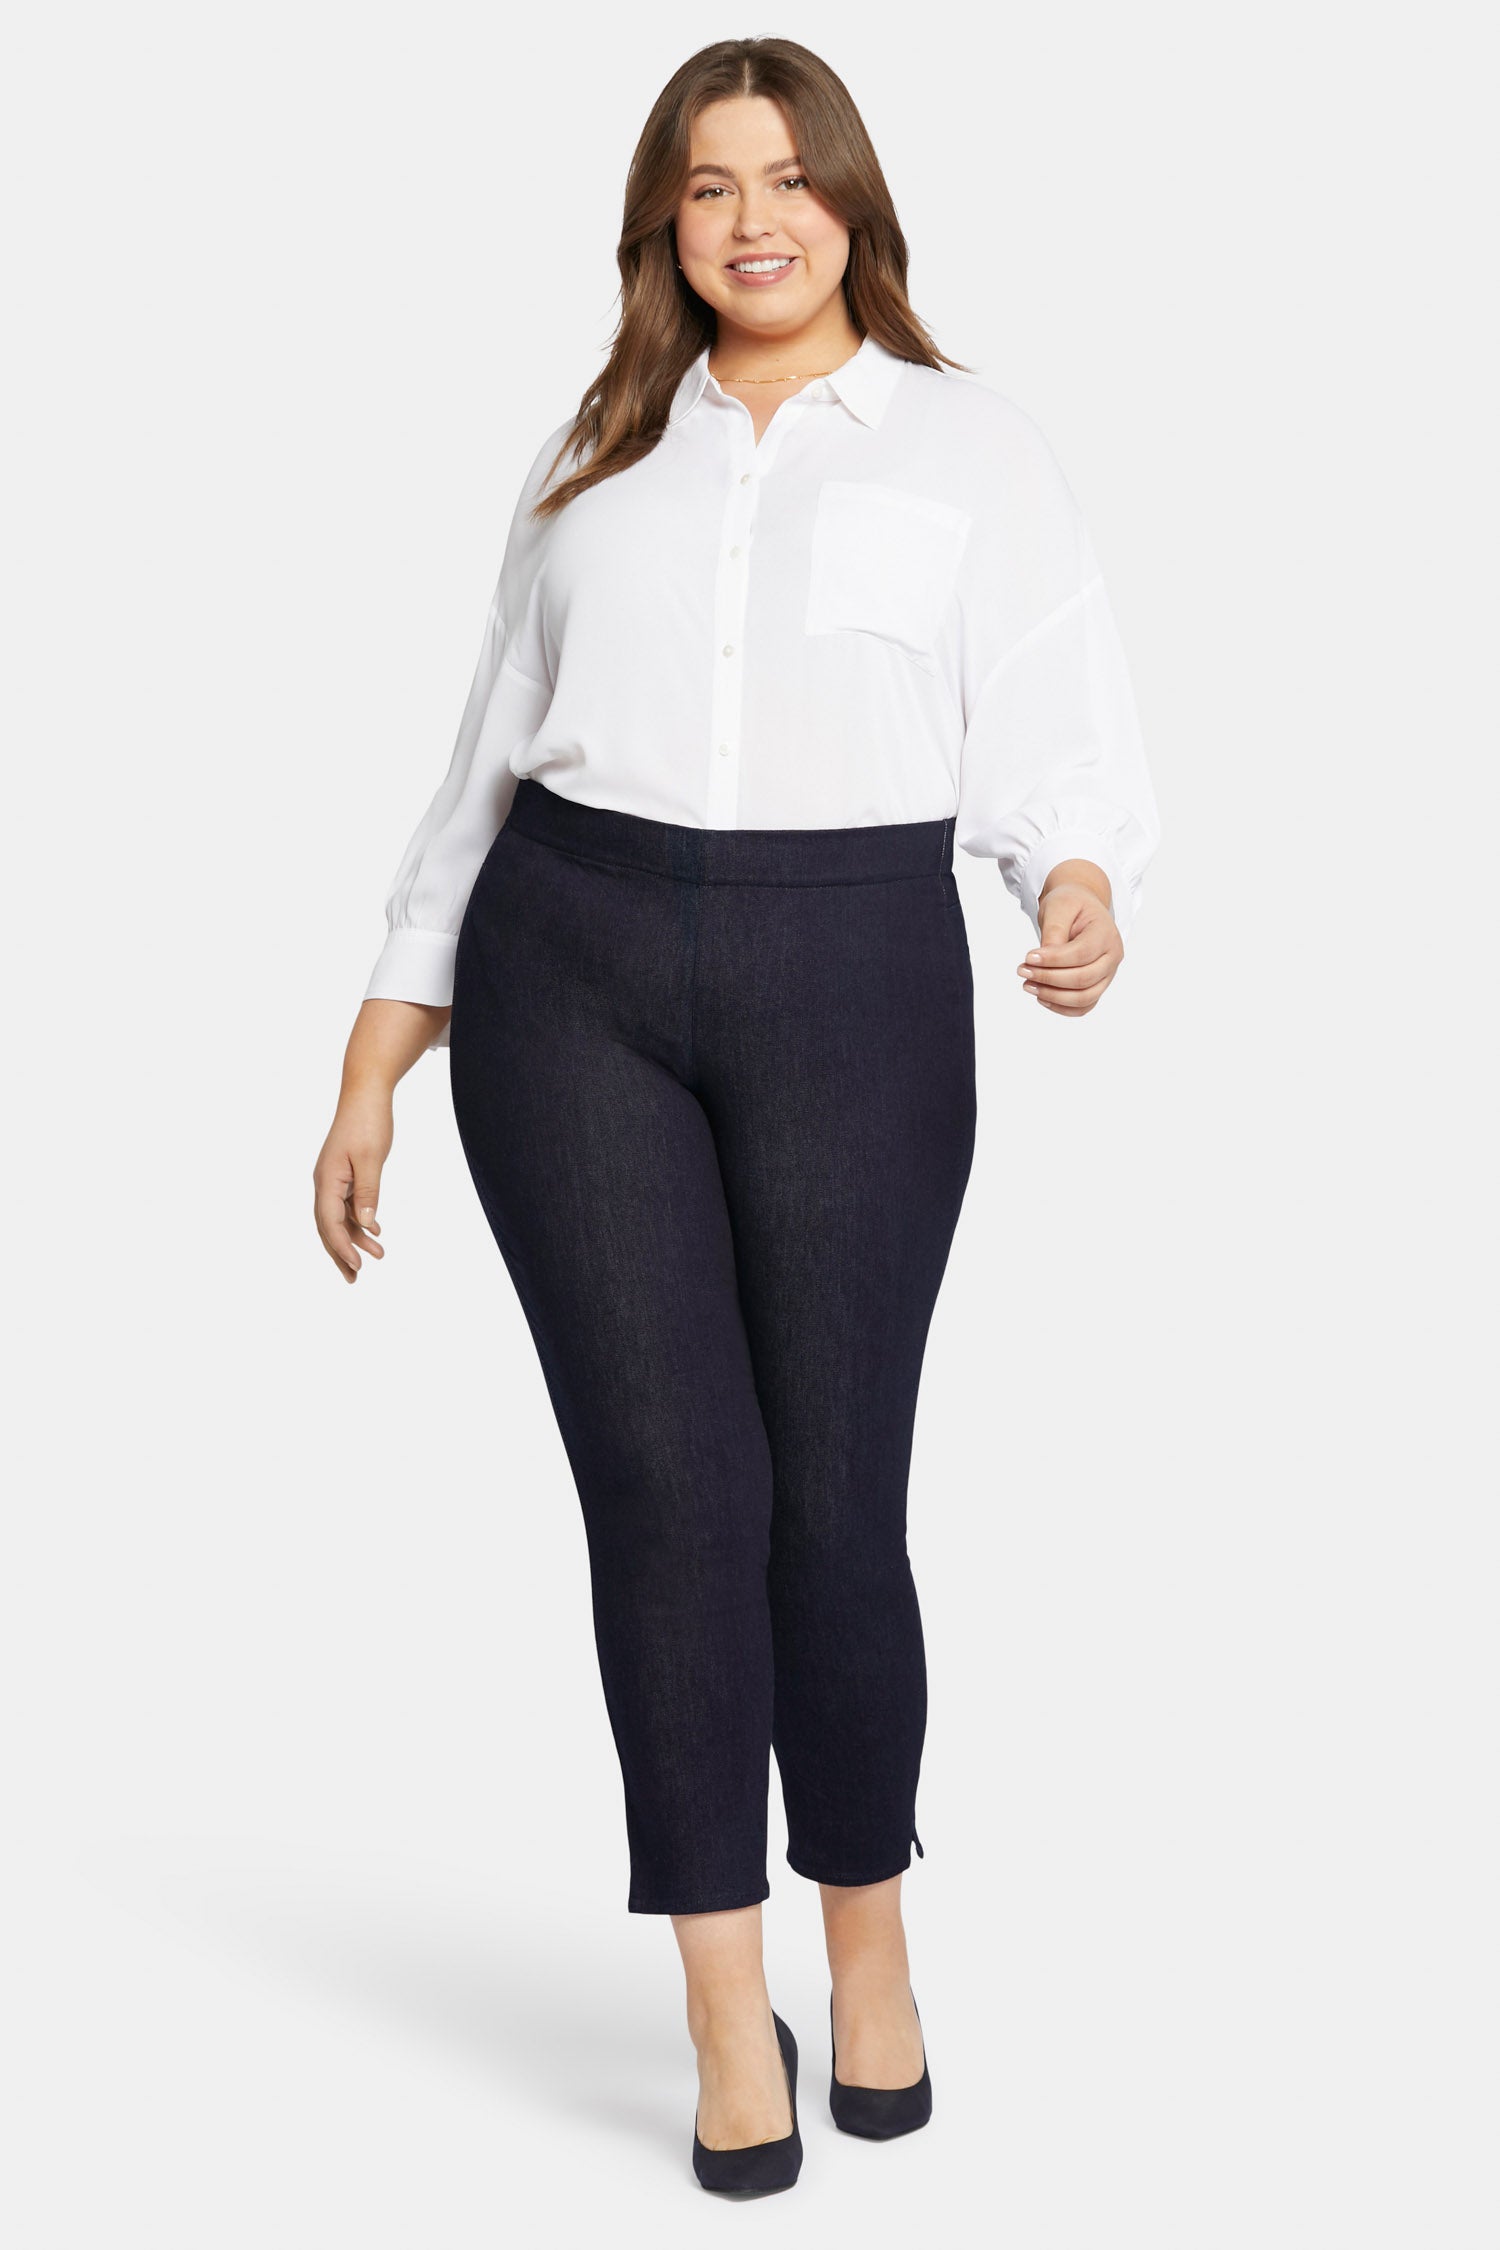 Women's Plus Size Pull-Ons - Jeans, Shorts & More